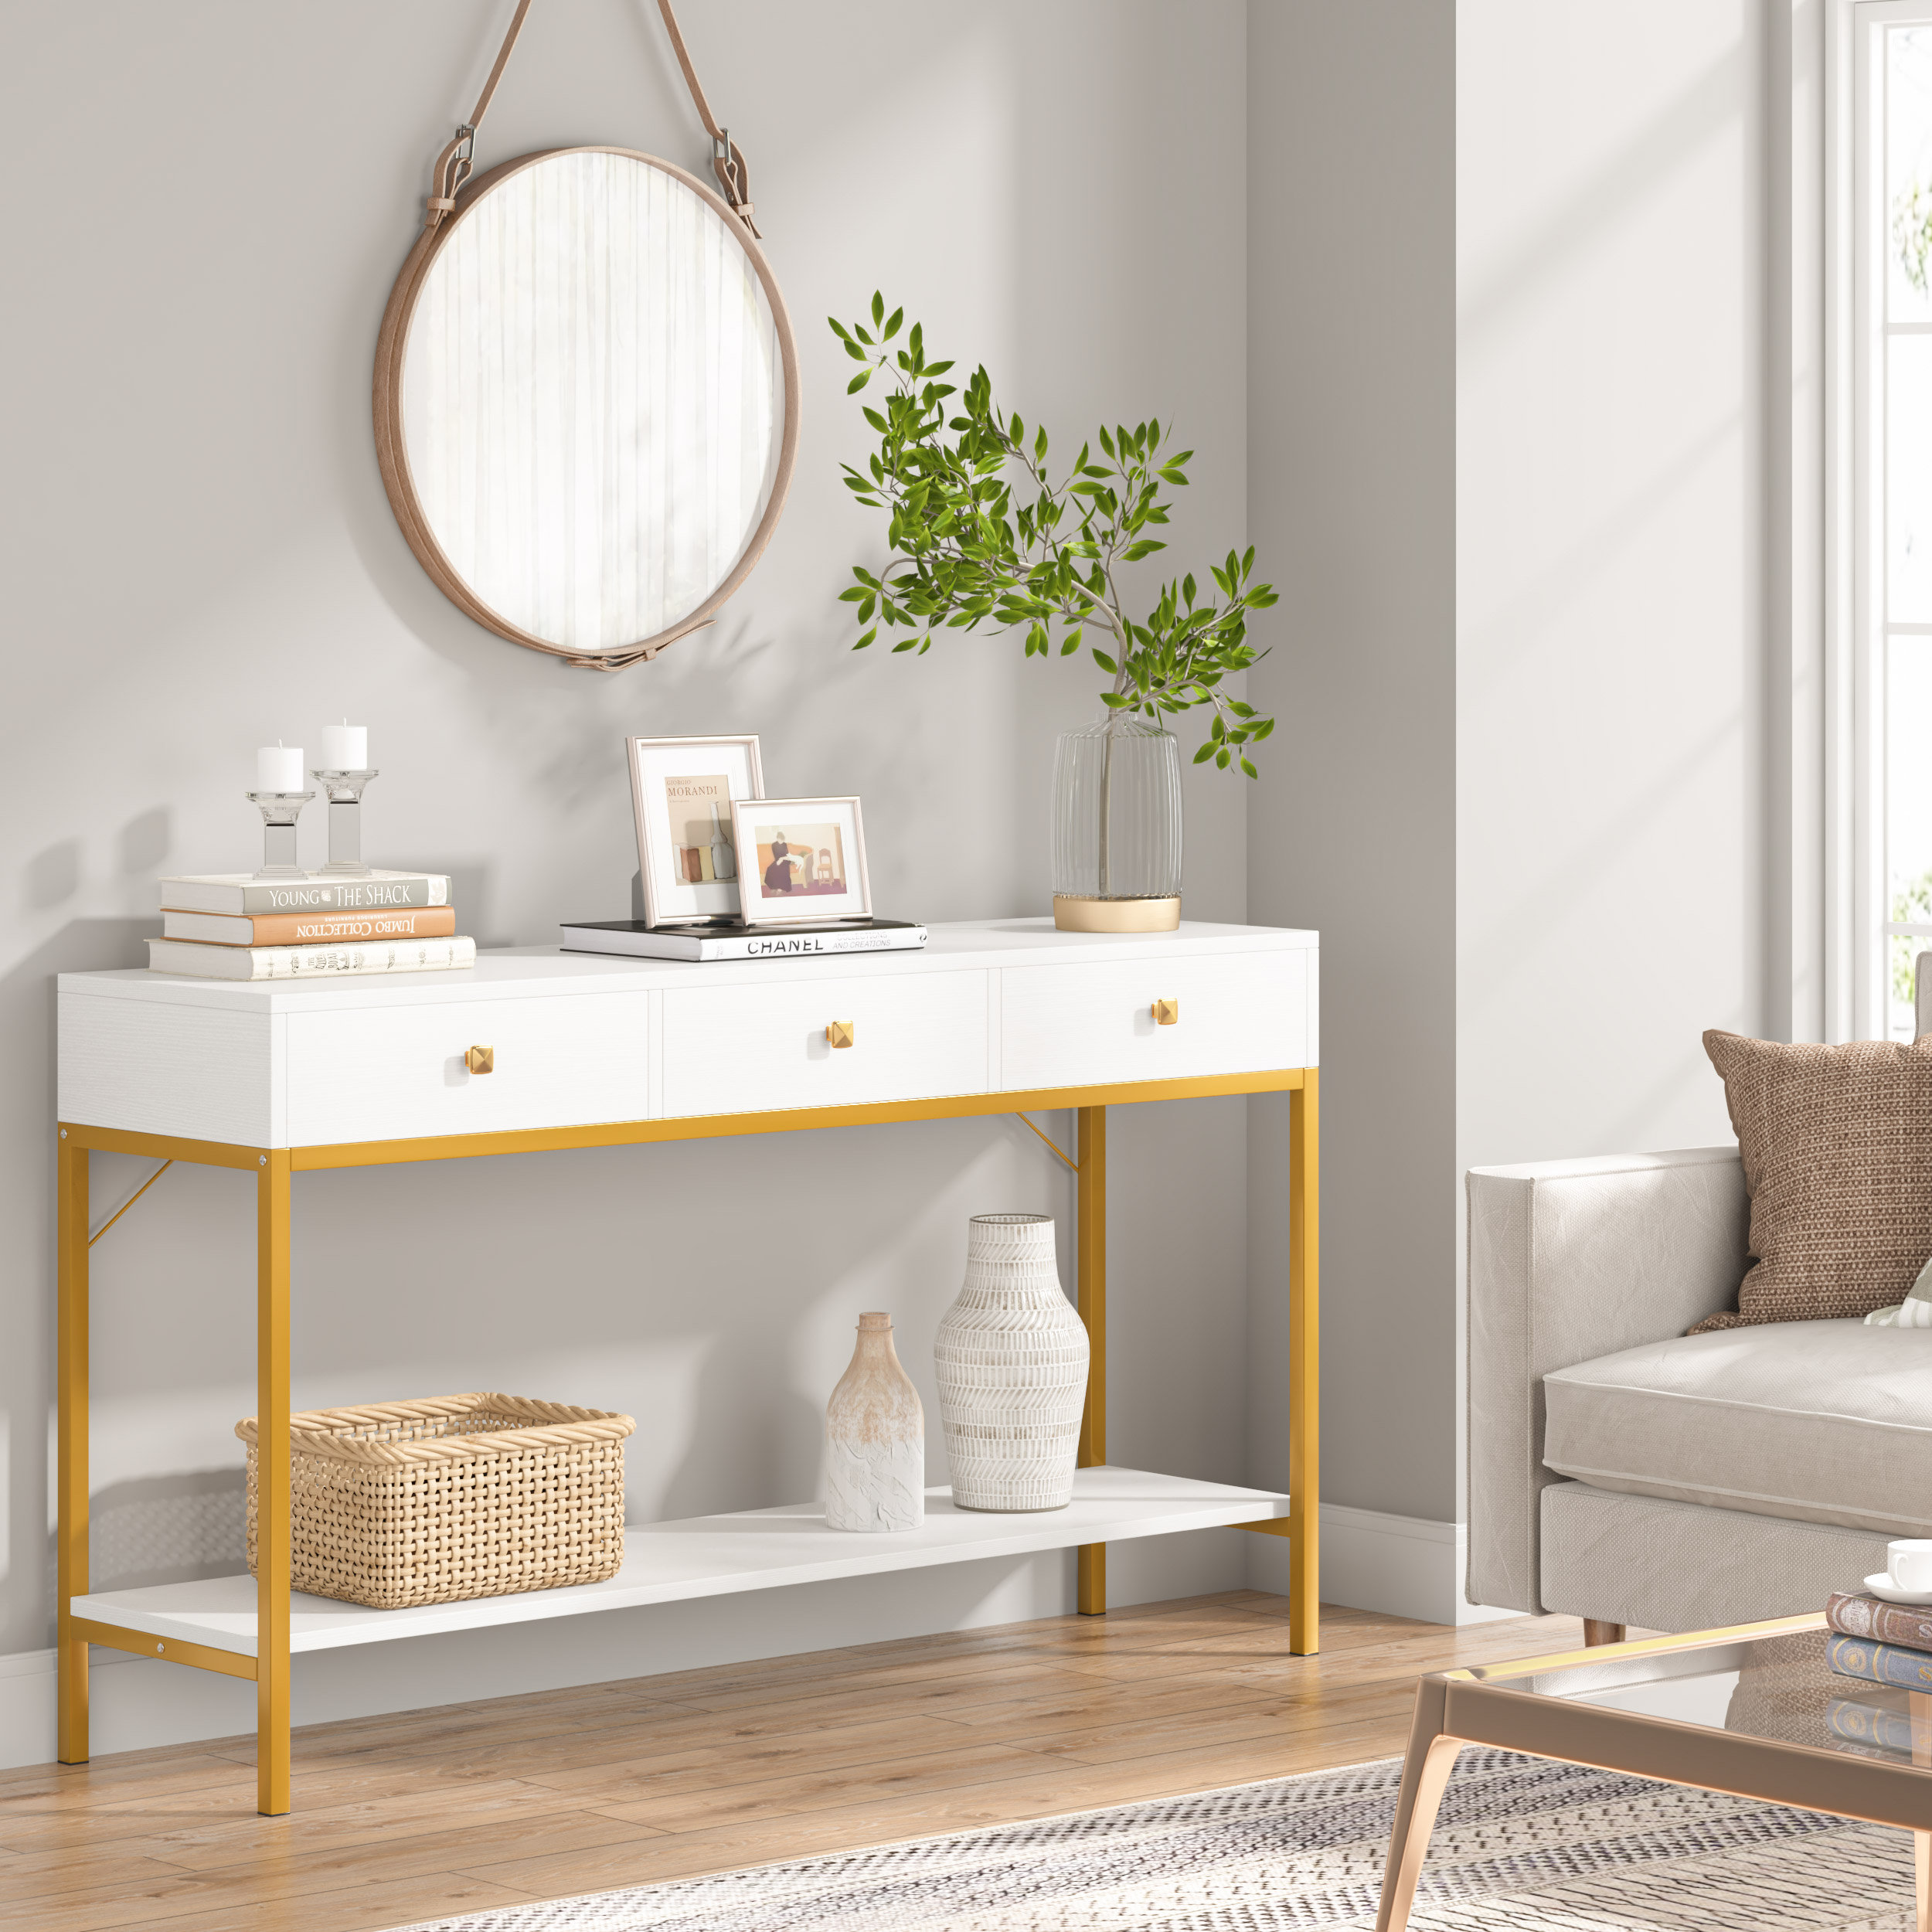 Venkat 54 Console Table Everly Quinn Color: White